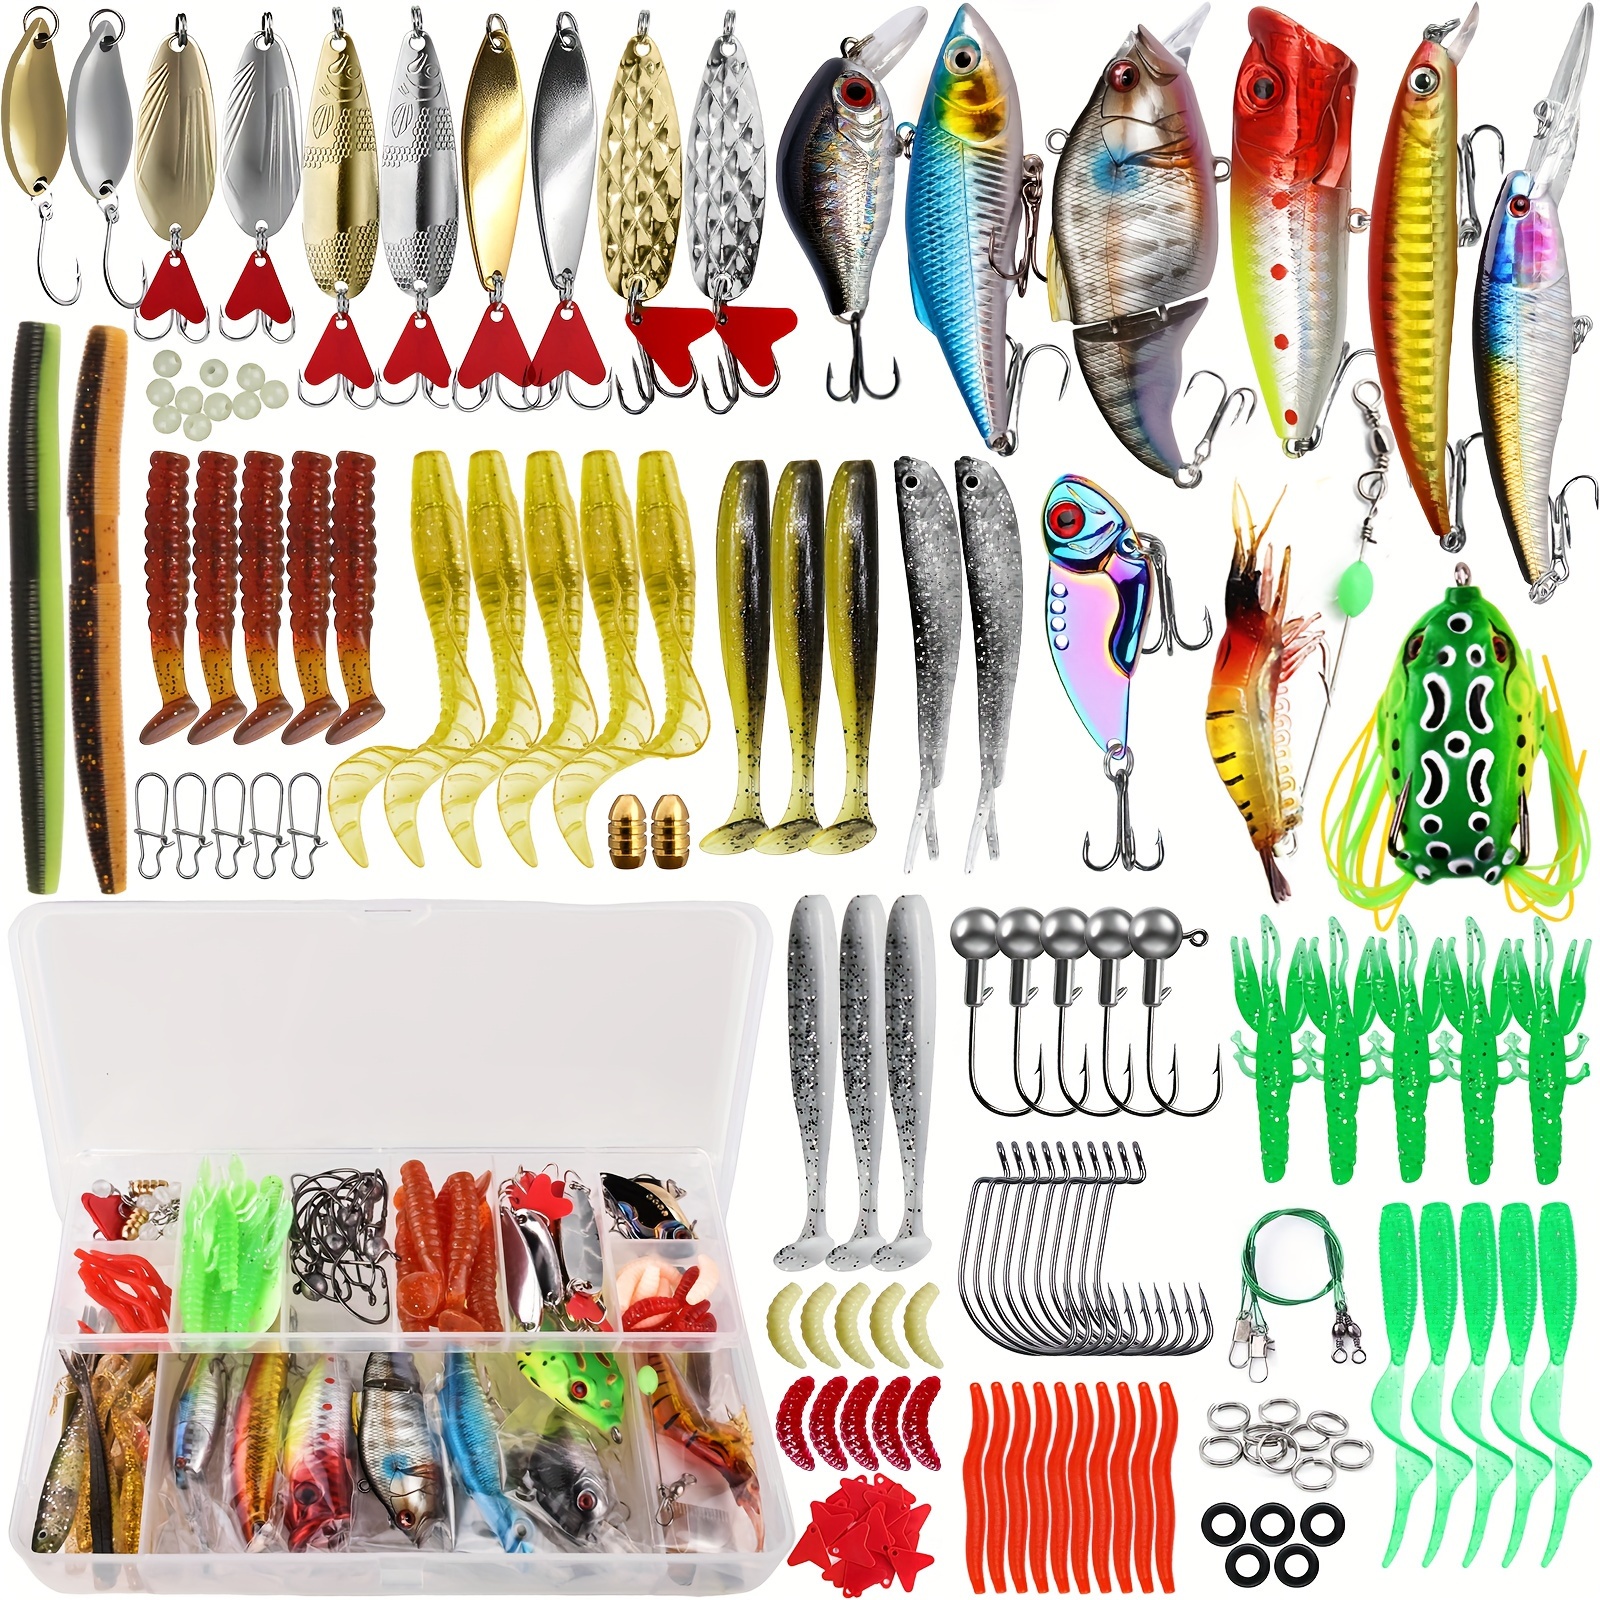 

Fishing Lures Kit, Bionic Hard Bait, Soft Lure, Vib Lure, Popper, Crank Bait, Fishing Accessories For Freshwater And Saltwater